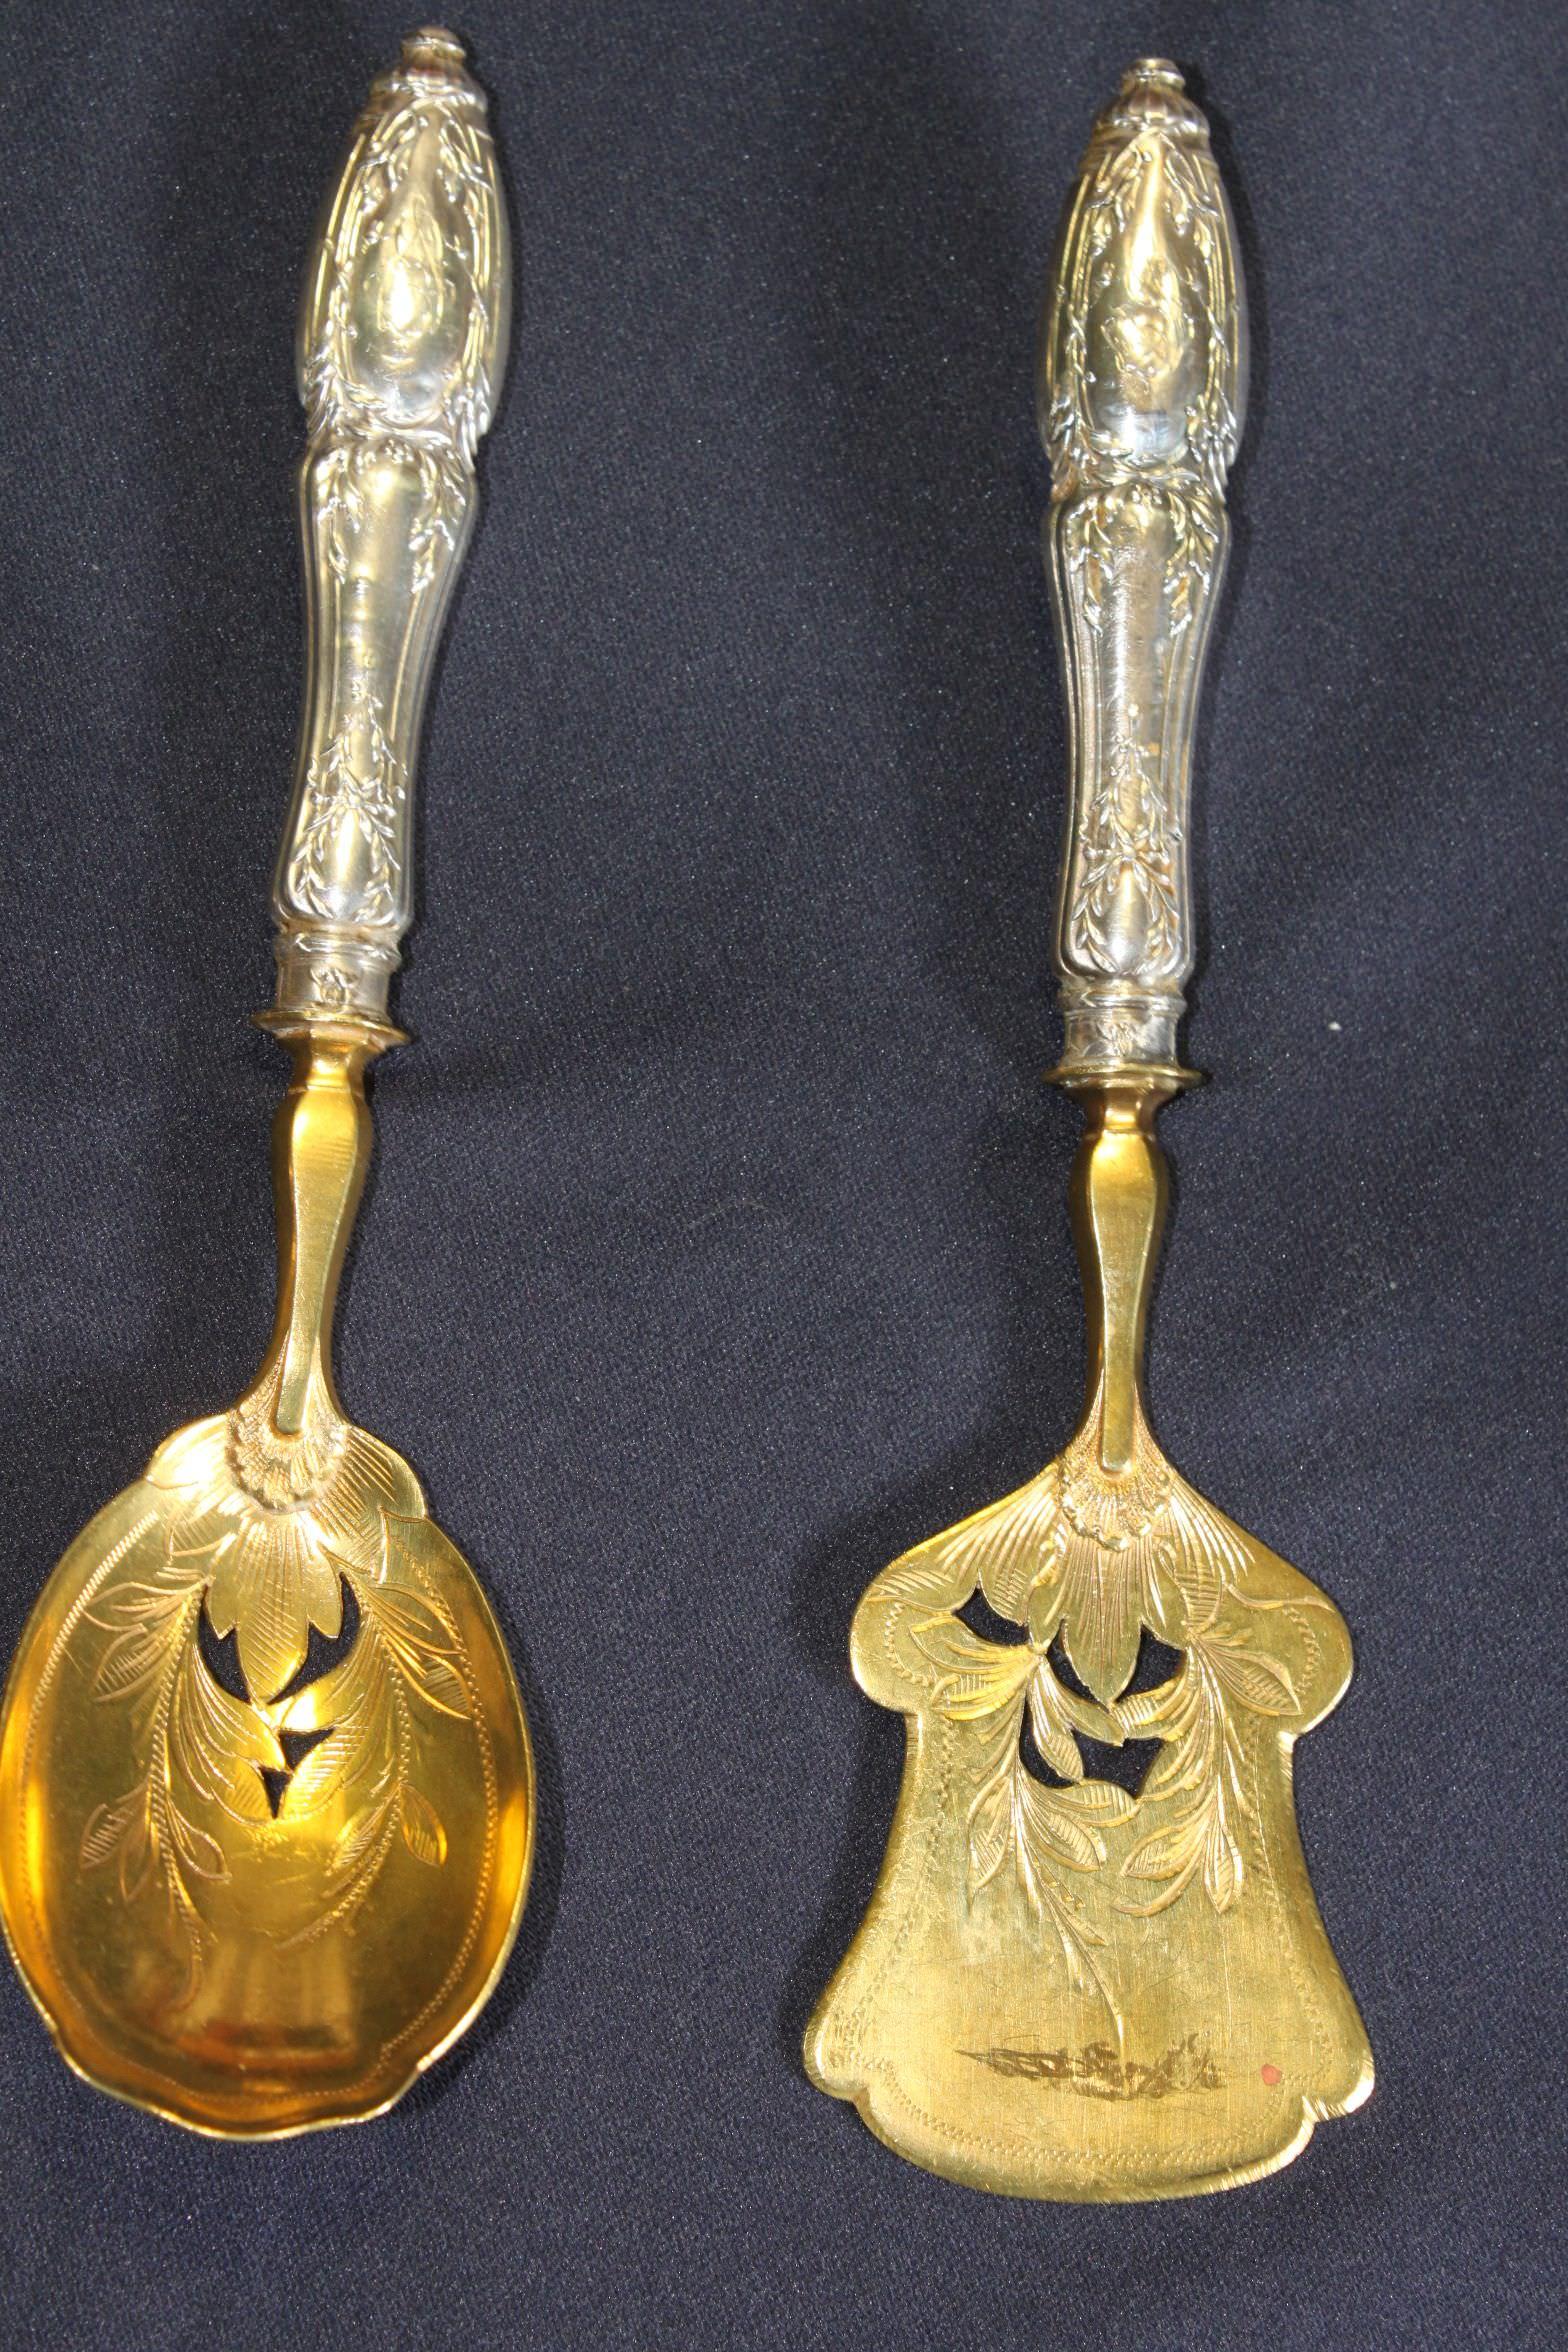 High Victorian Silver Gilt Hors d'oeuvres Set